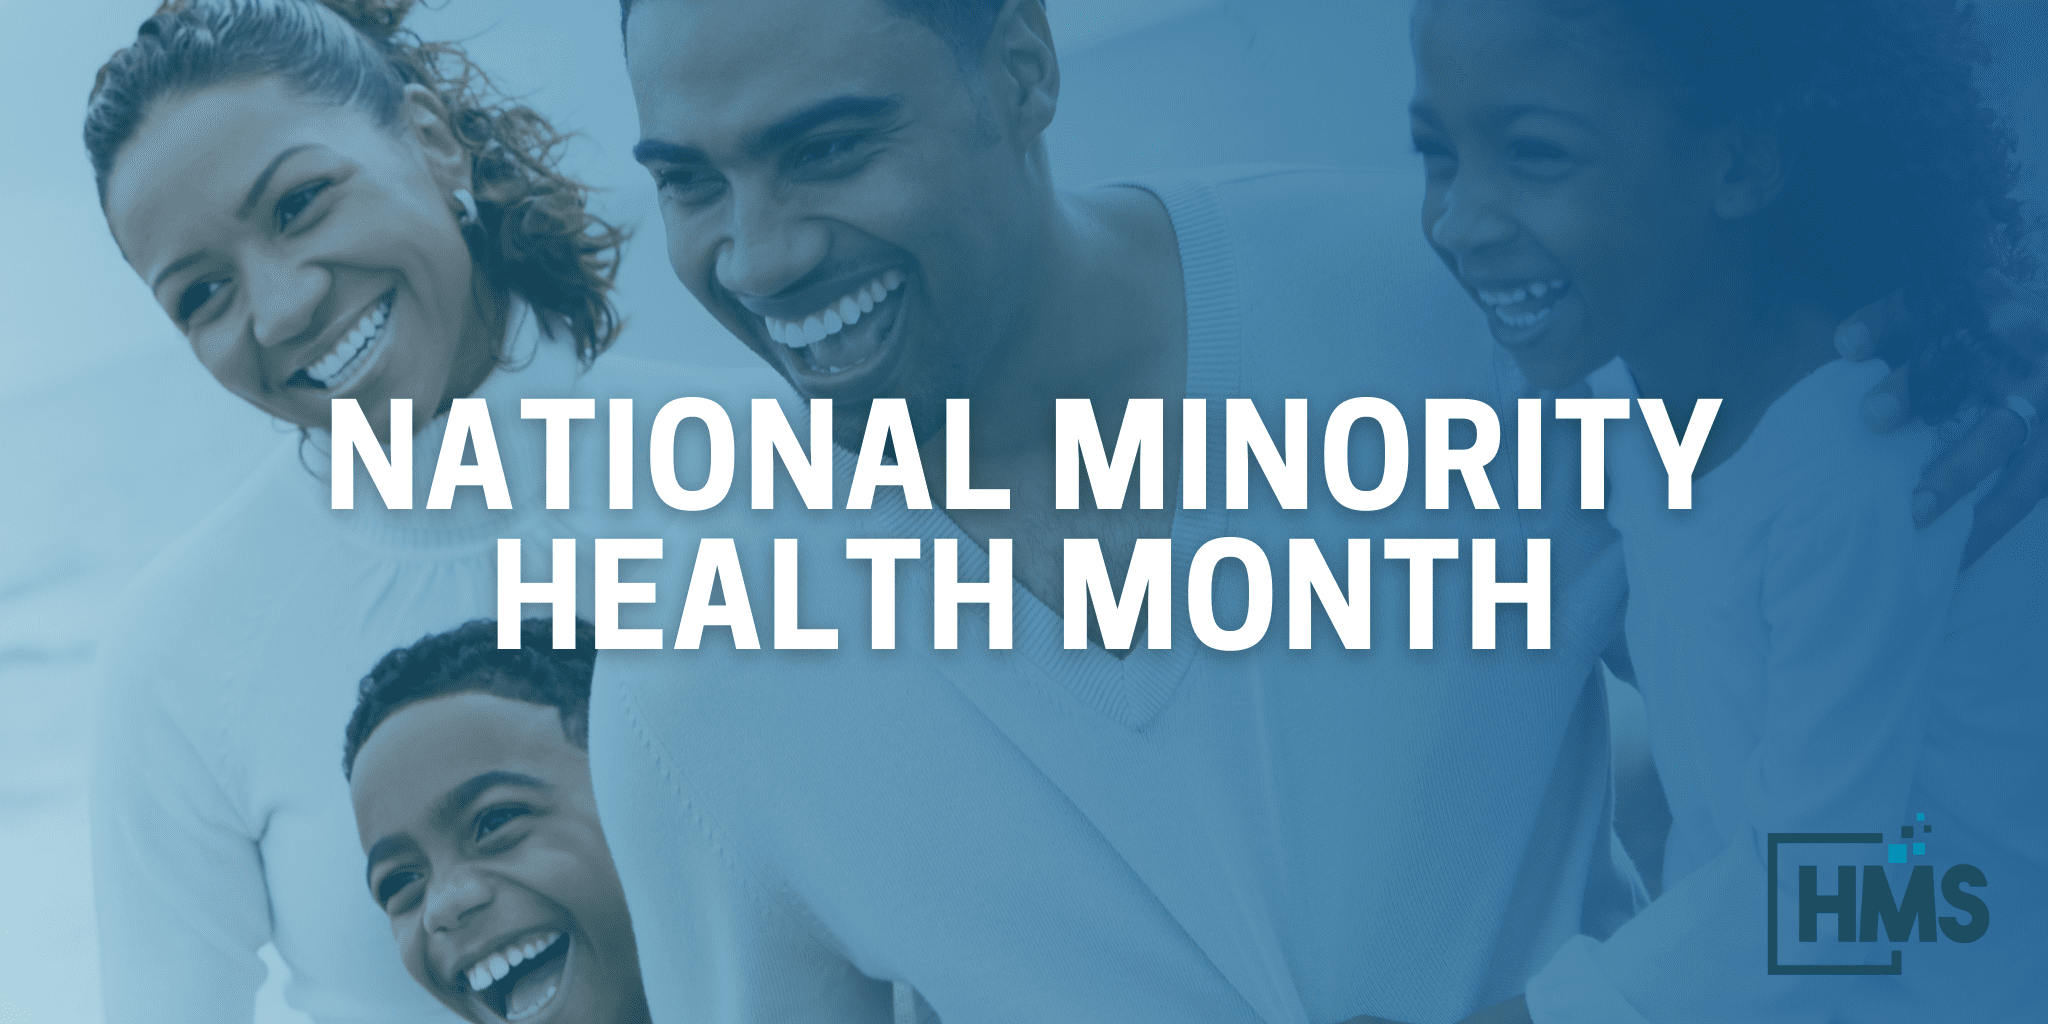 Give Your Community a Boost This National Minority Health Month HMS